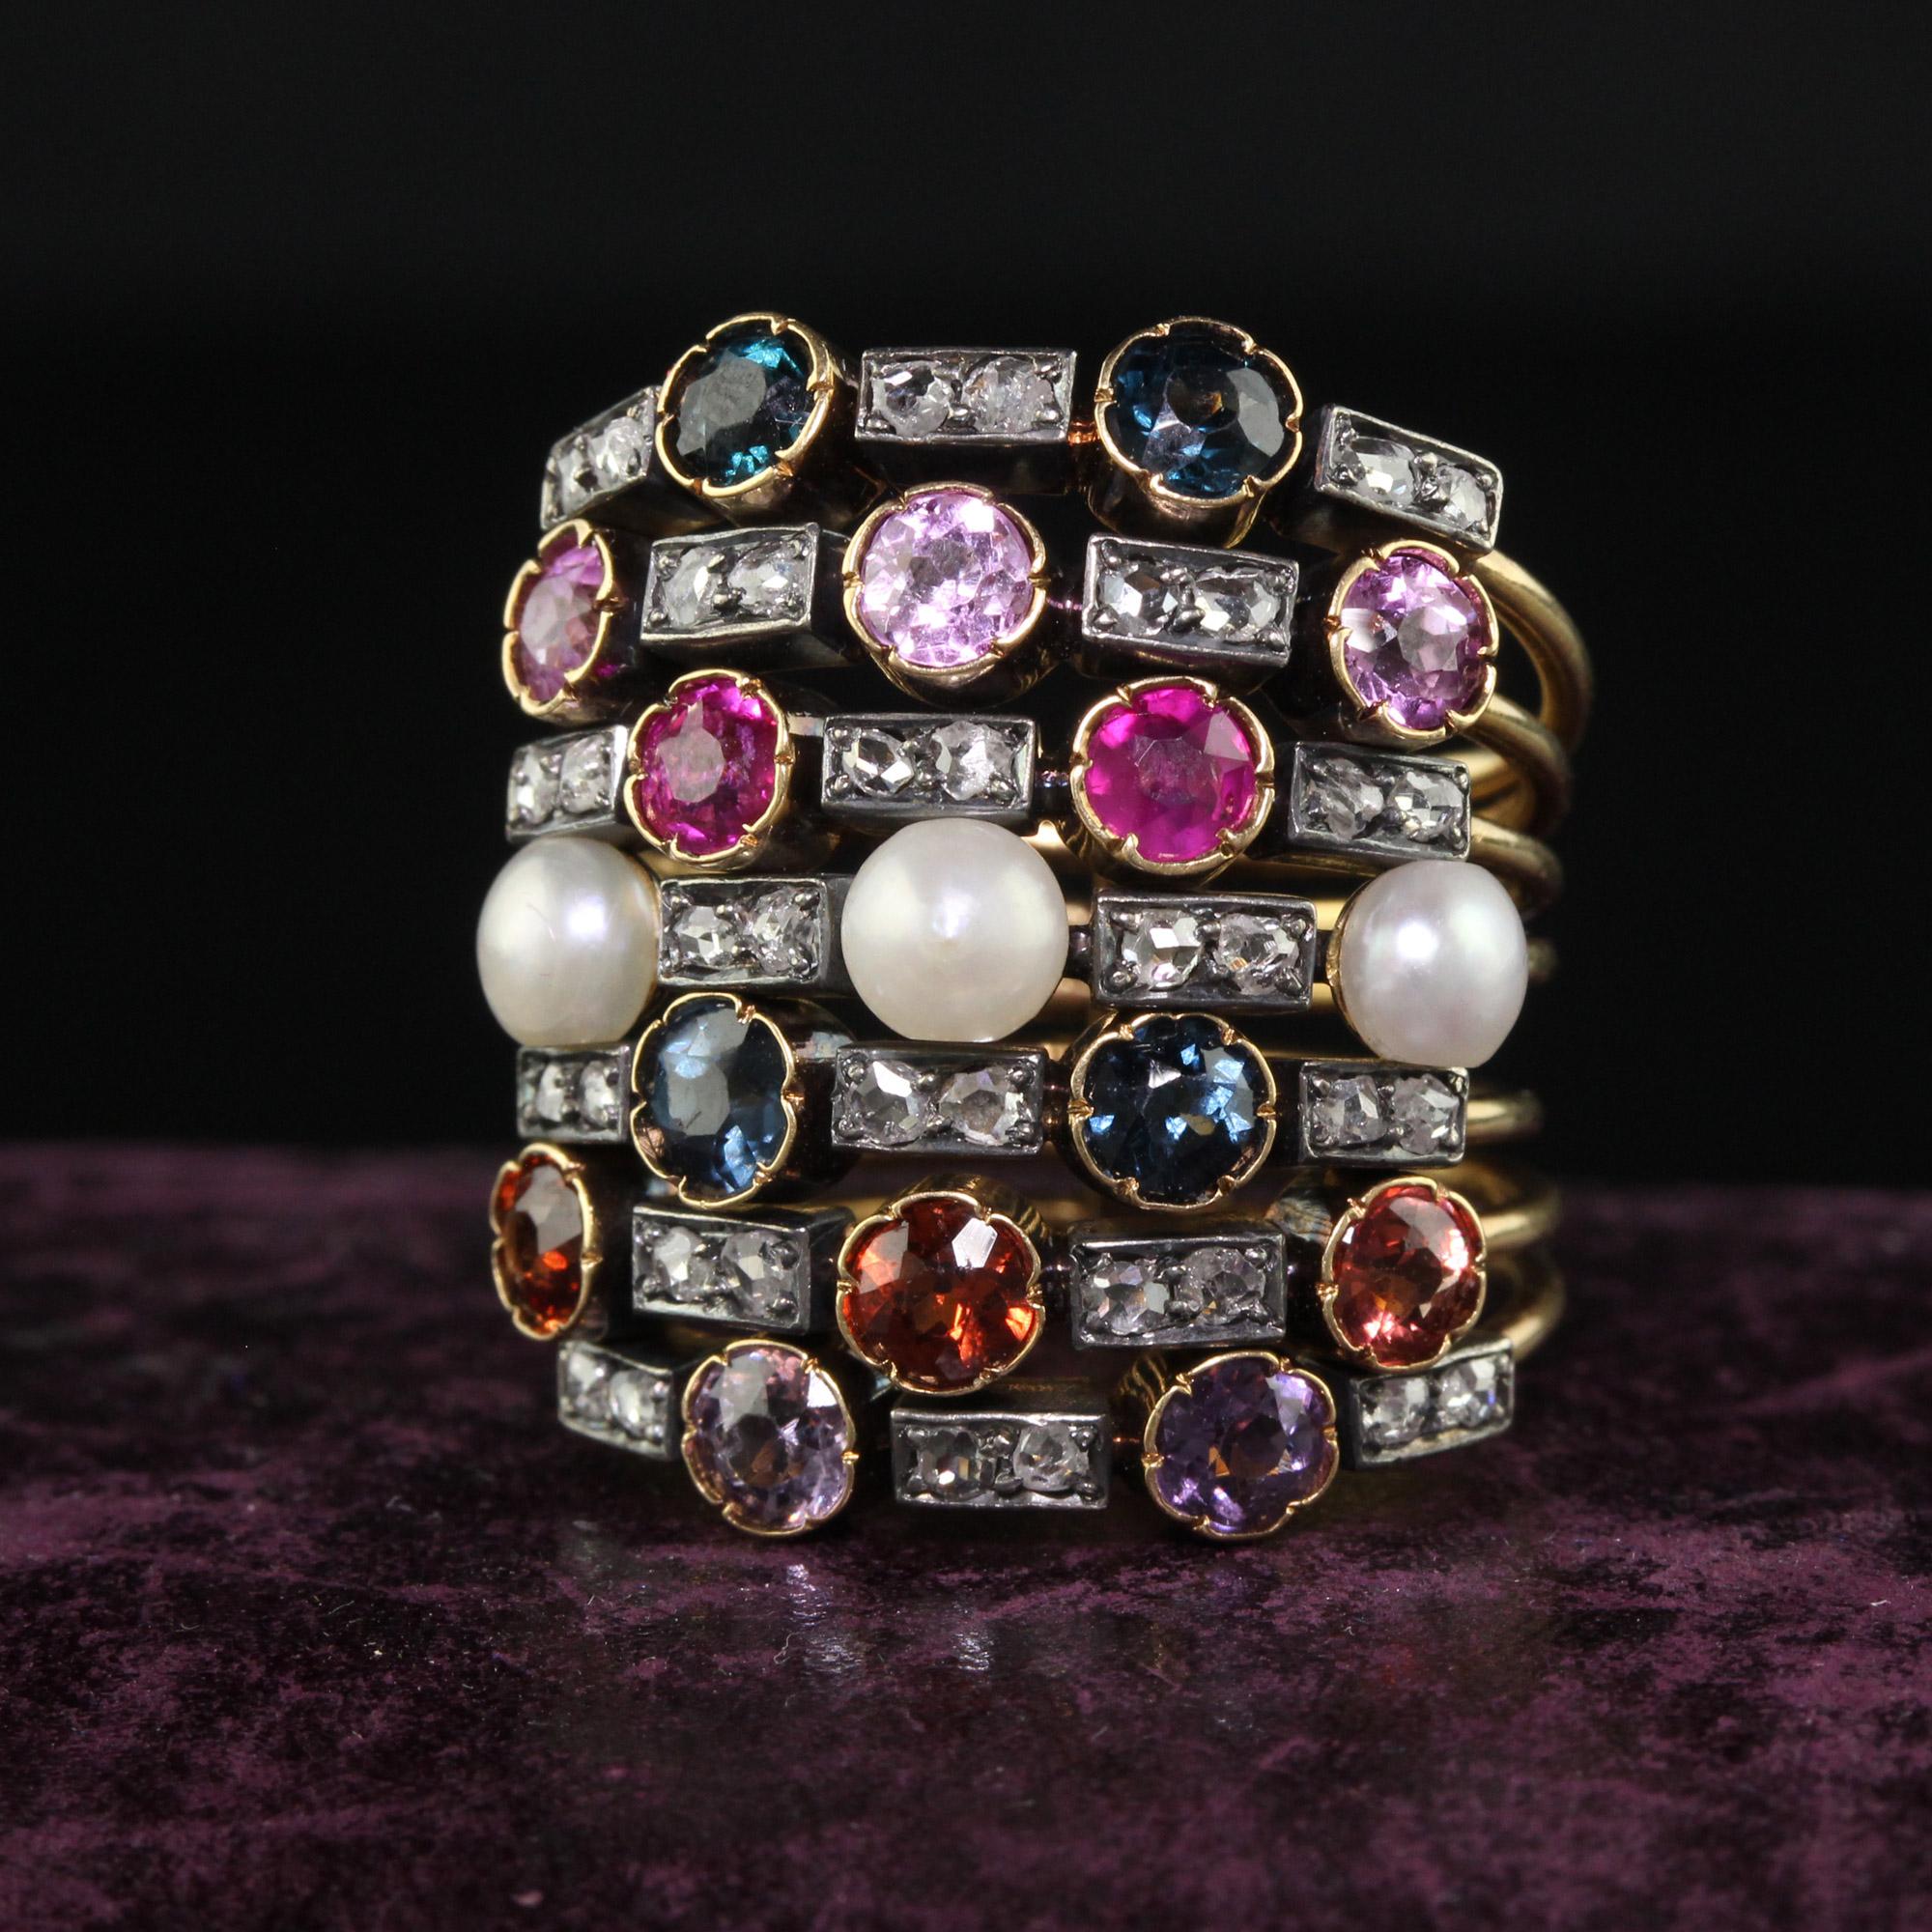 Beautiful Antique Victorian 18K Yellow Gold Multi Sapphire Pearl Ruby and Diamond Harem Ring. This incredible harem ring is crafted in 18k yellow gold and silver top. There are a colorful array of sapphires, diamonds, and pearls on this incredible